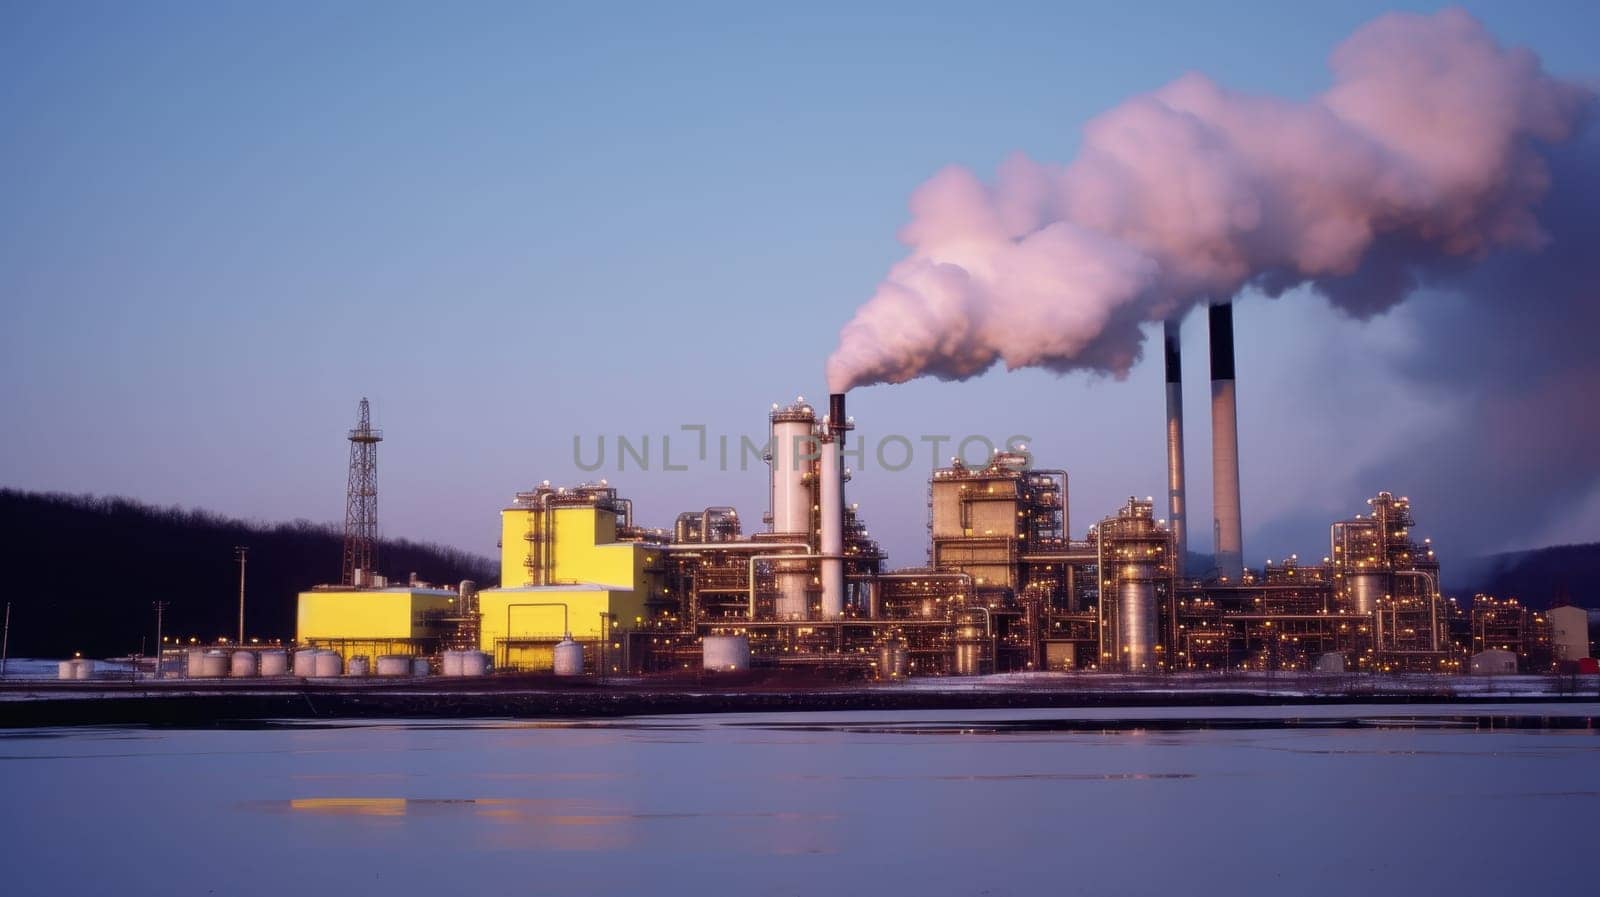 Polluted industrial chemical plant with dense smoke emission and environmental impacts by Hil